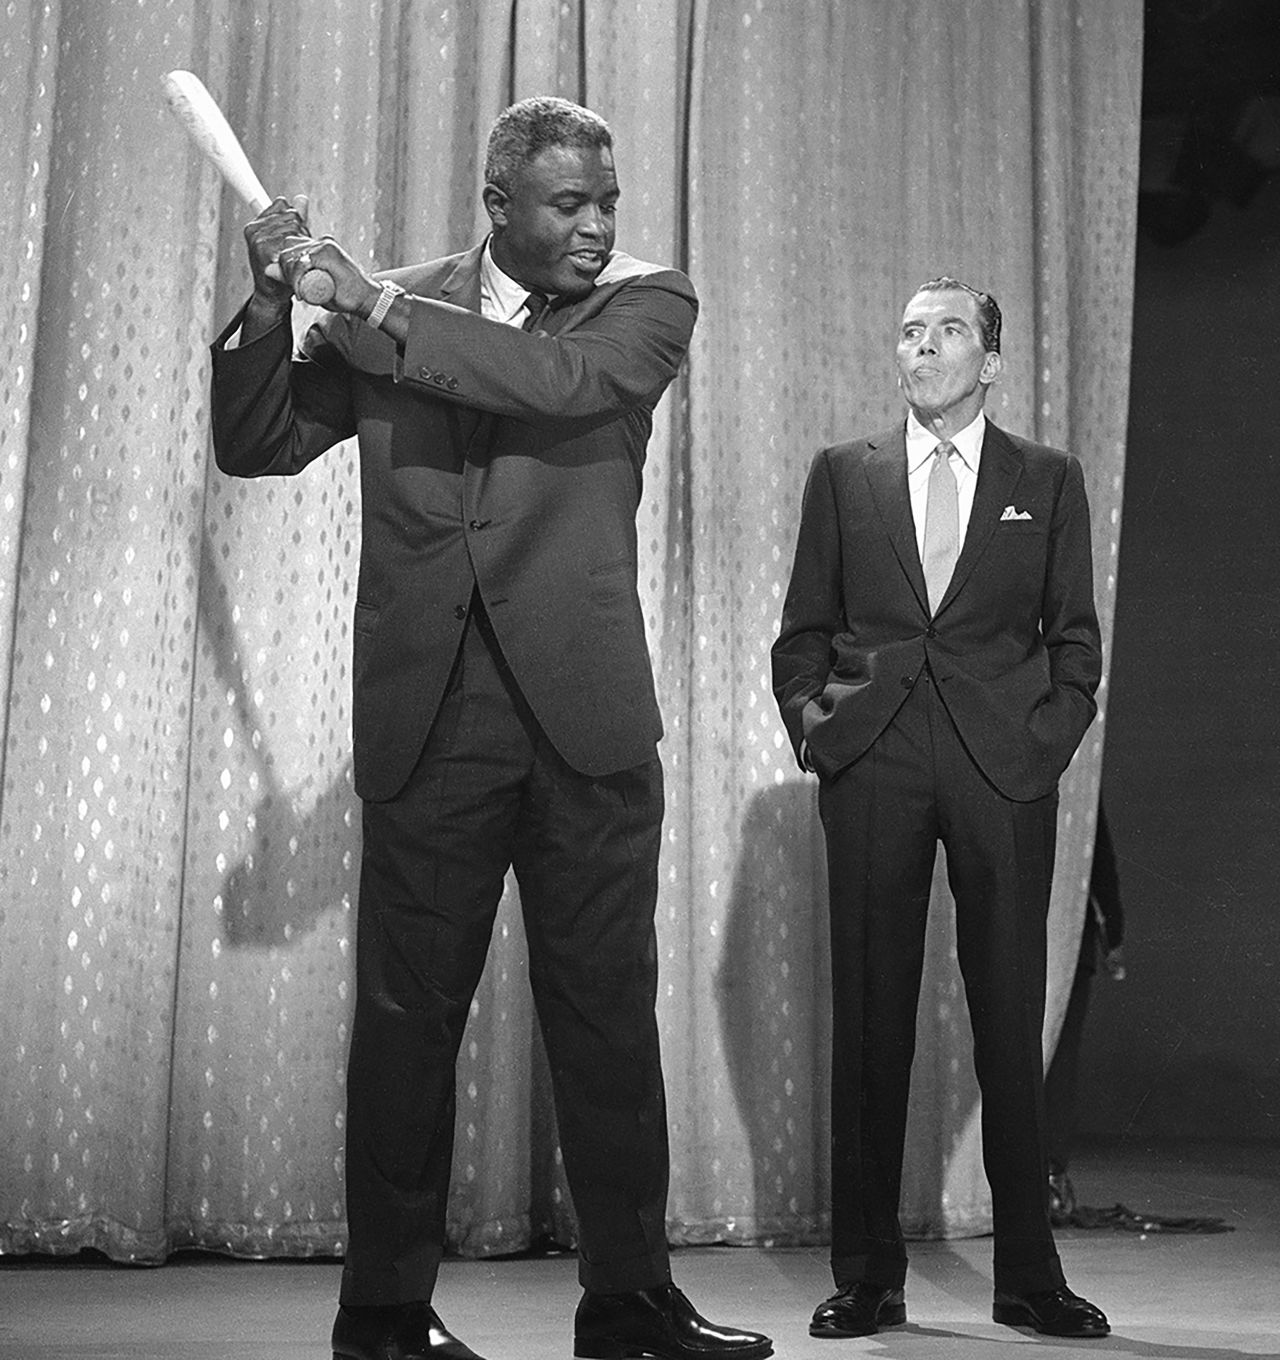 Robinson appears on "The Ed Sullivan Show" in 1962. After retiring, Robinson became an executive for the Chock Full o'Nuts coffee company. He also spoke out on civil rights.